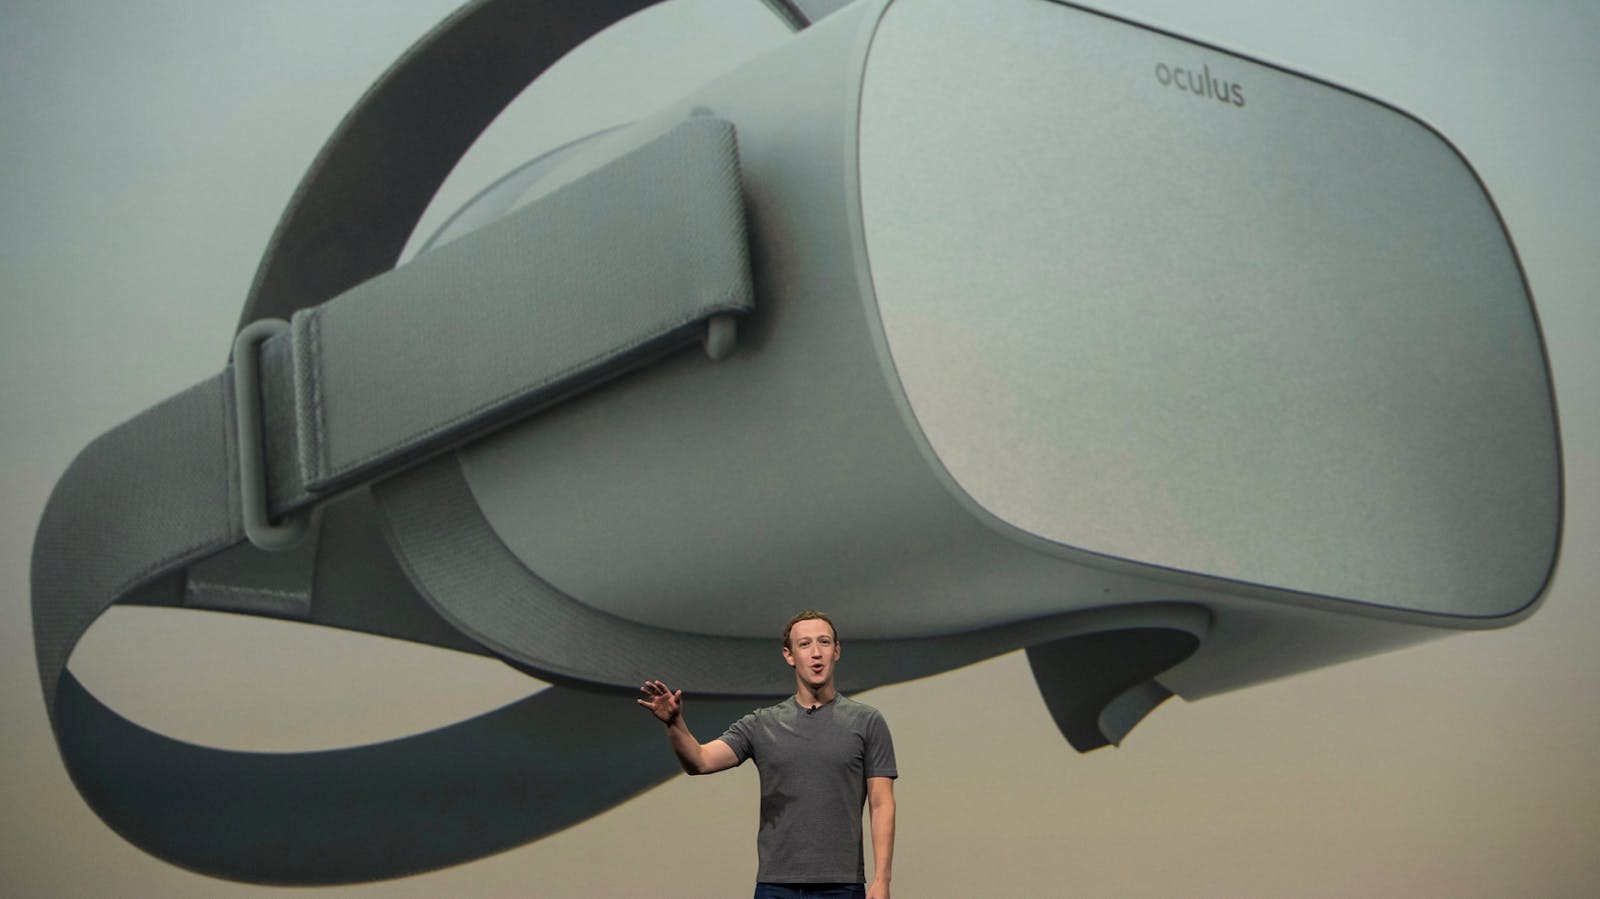 Mark Zuckerberg, CEO of Facebook, speaks at an Oculus event last year. Photo by Bloomberg